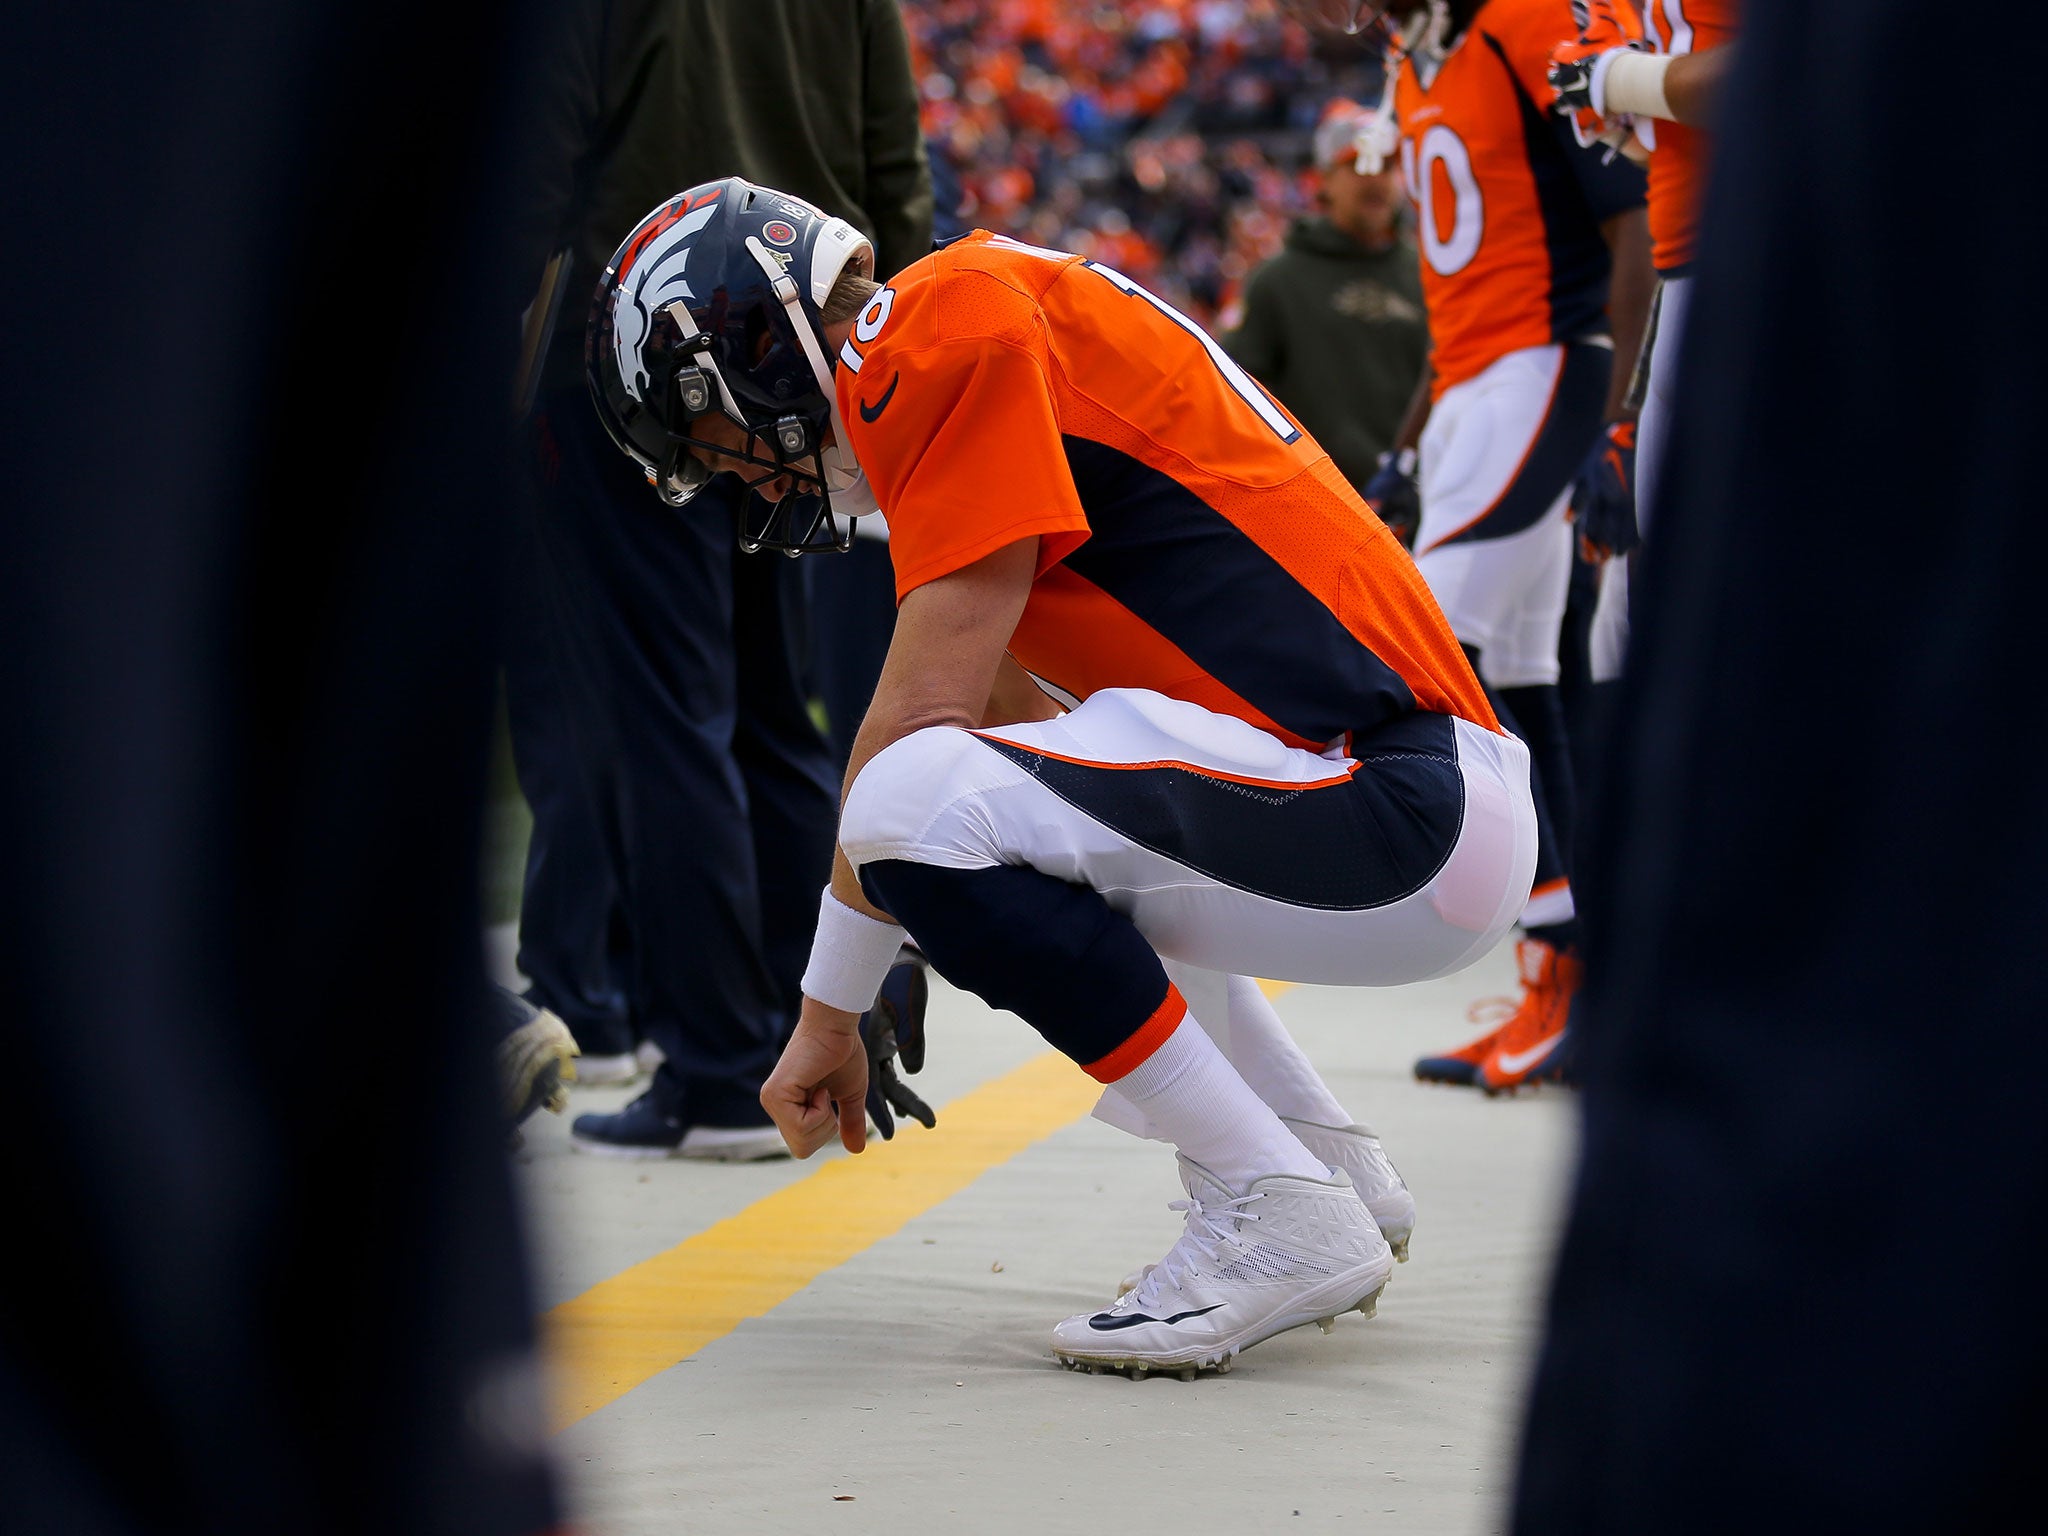 Peyton Manning was benched for the Denver Broncos despite beating Brett Favre's passing record